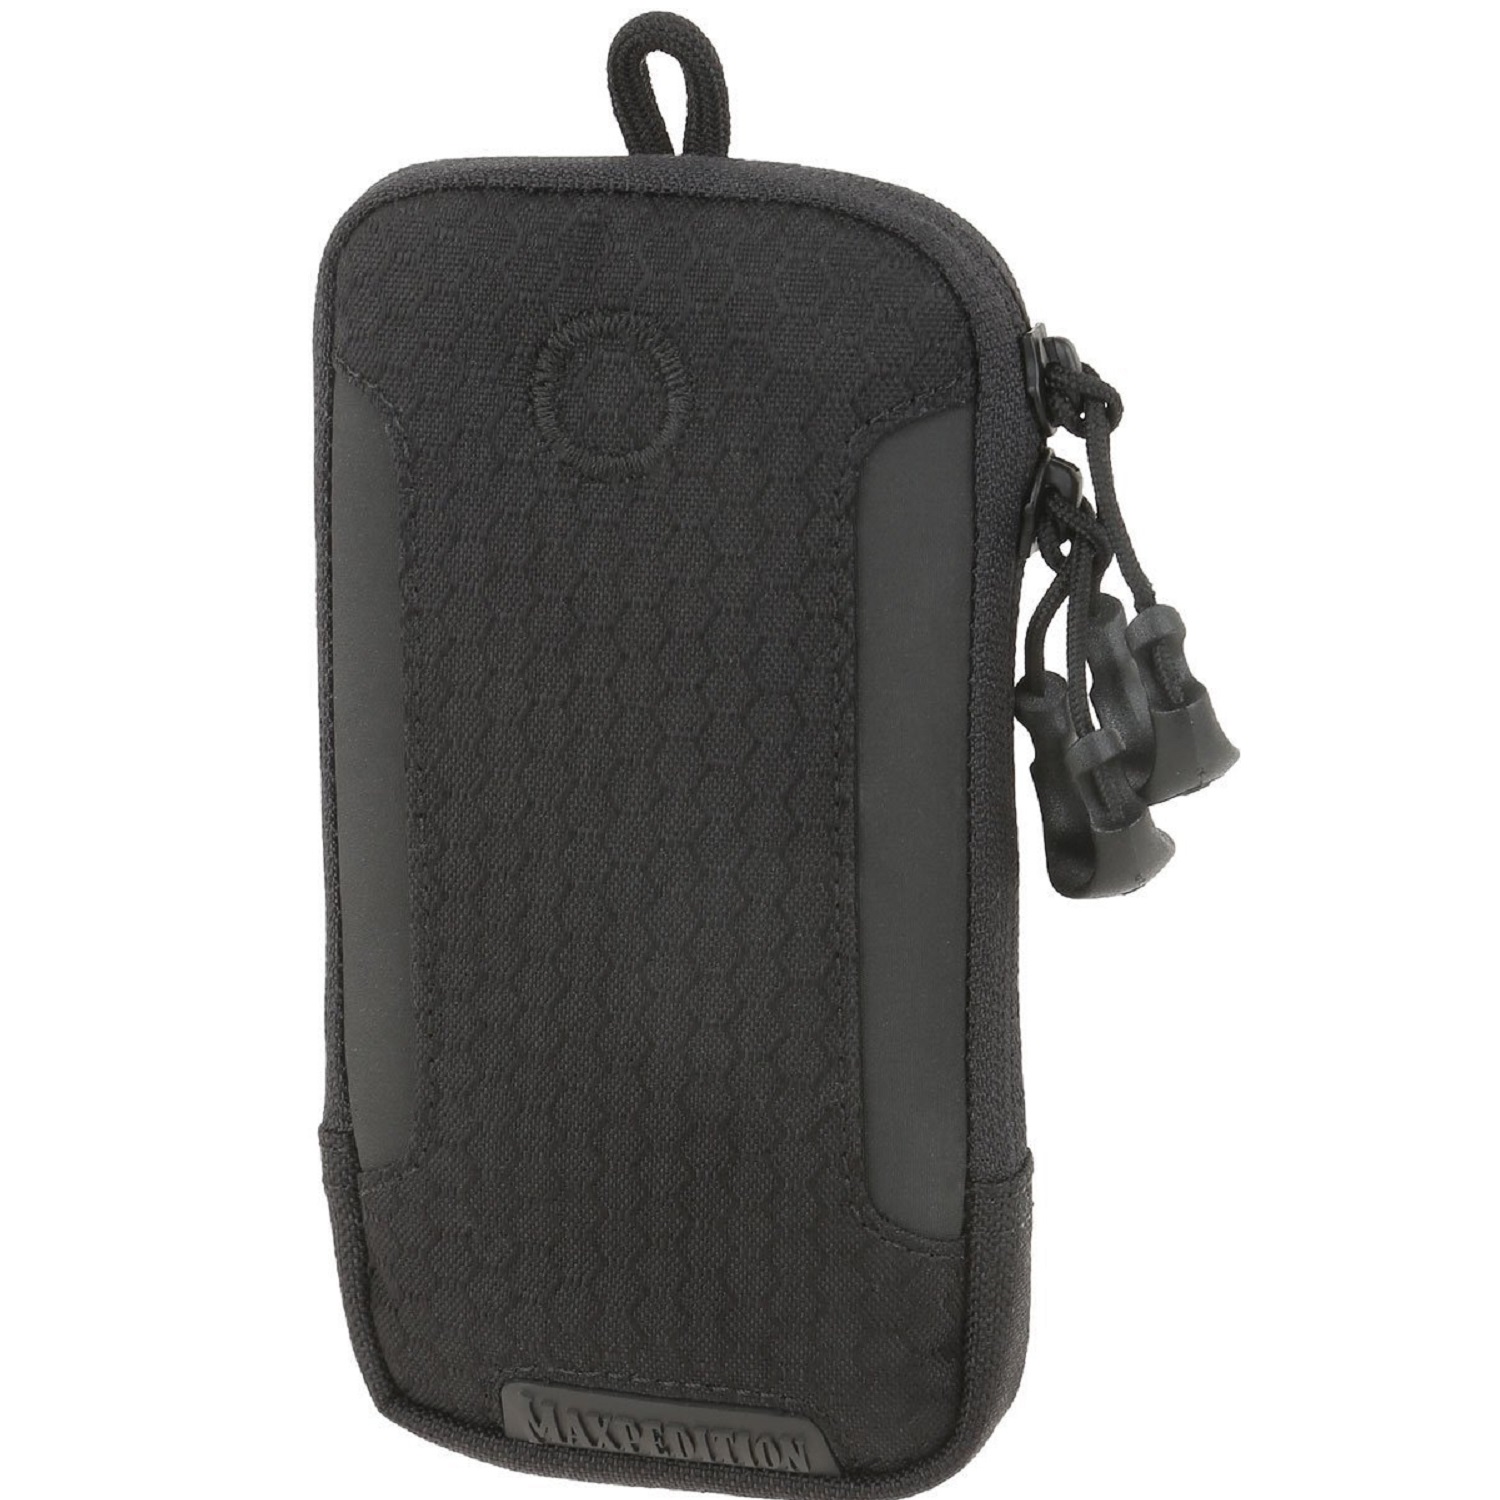 AGR PHP iPhone 6 Pouch Black - image 1 of 2